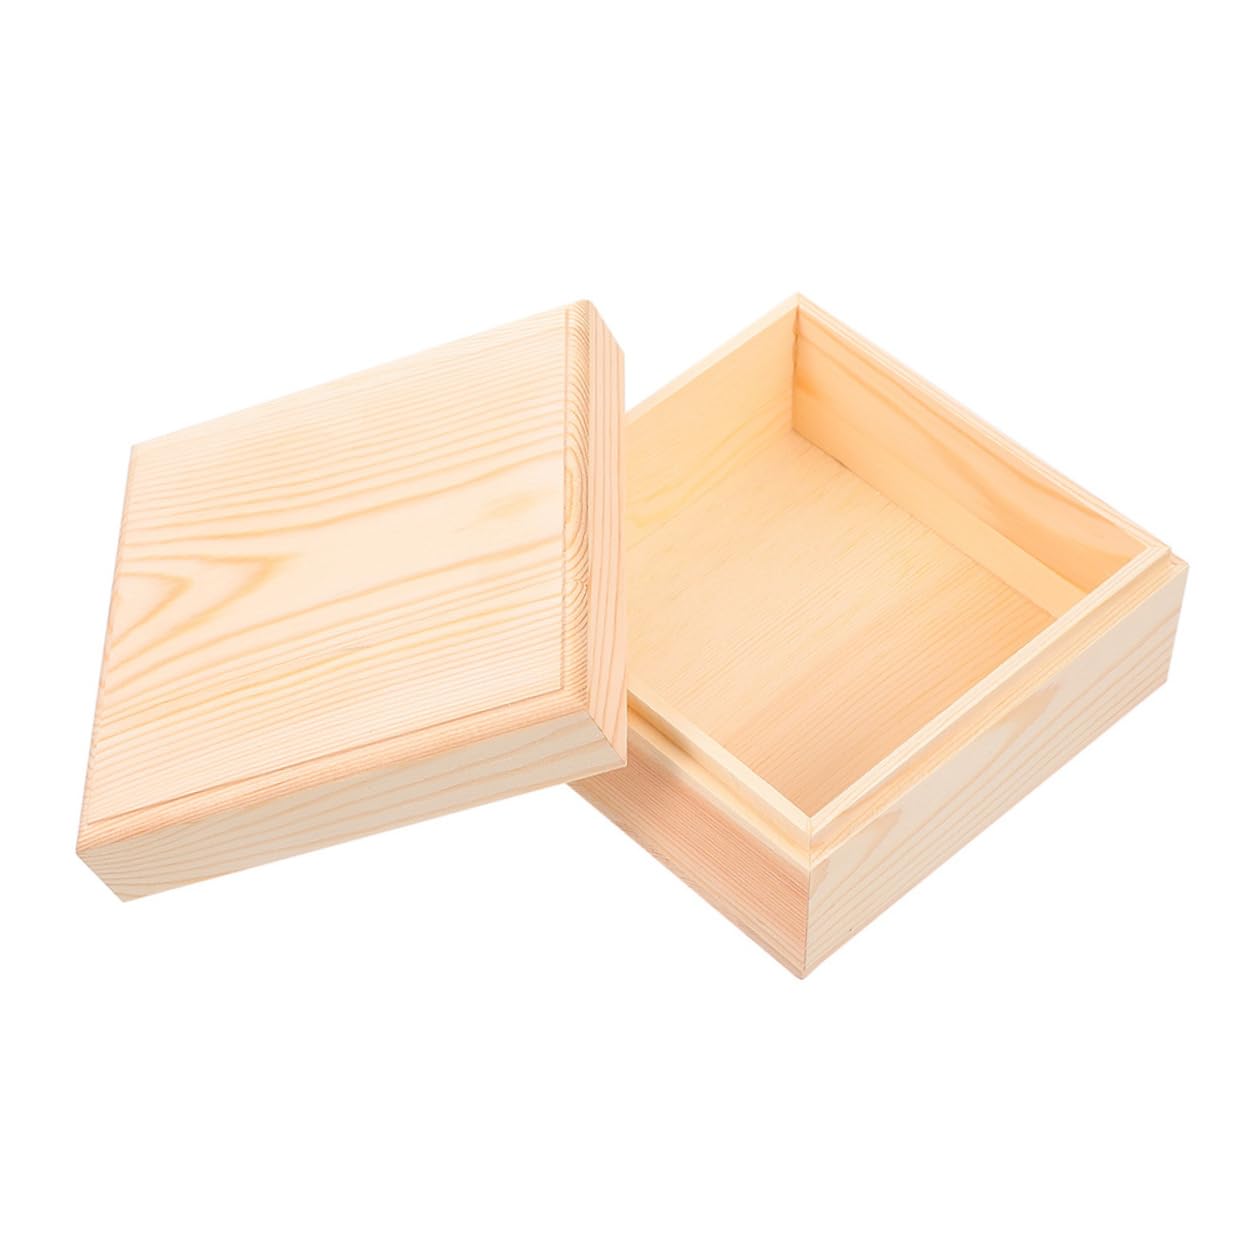 VOSAREA Box Square Wooden Storage Box Jewelry Cases Wooden Container Wooden Jewelry Holder Vintage Trinket Organizer Wood Chest Trunk Unfinished Case Heaven and Earth Cover Flowers